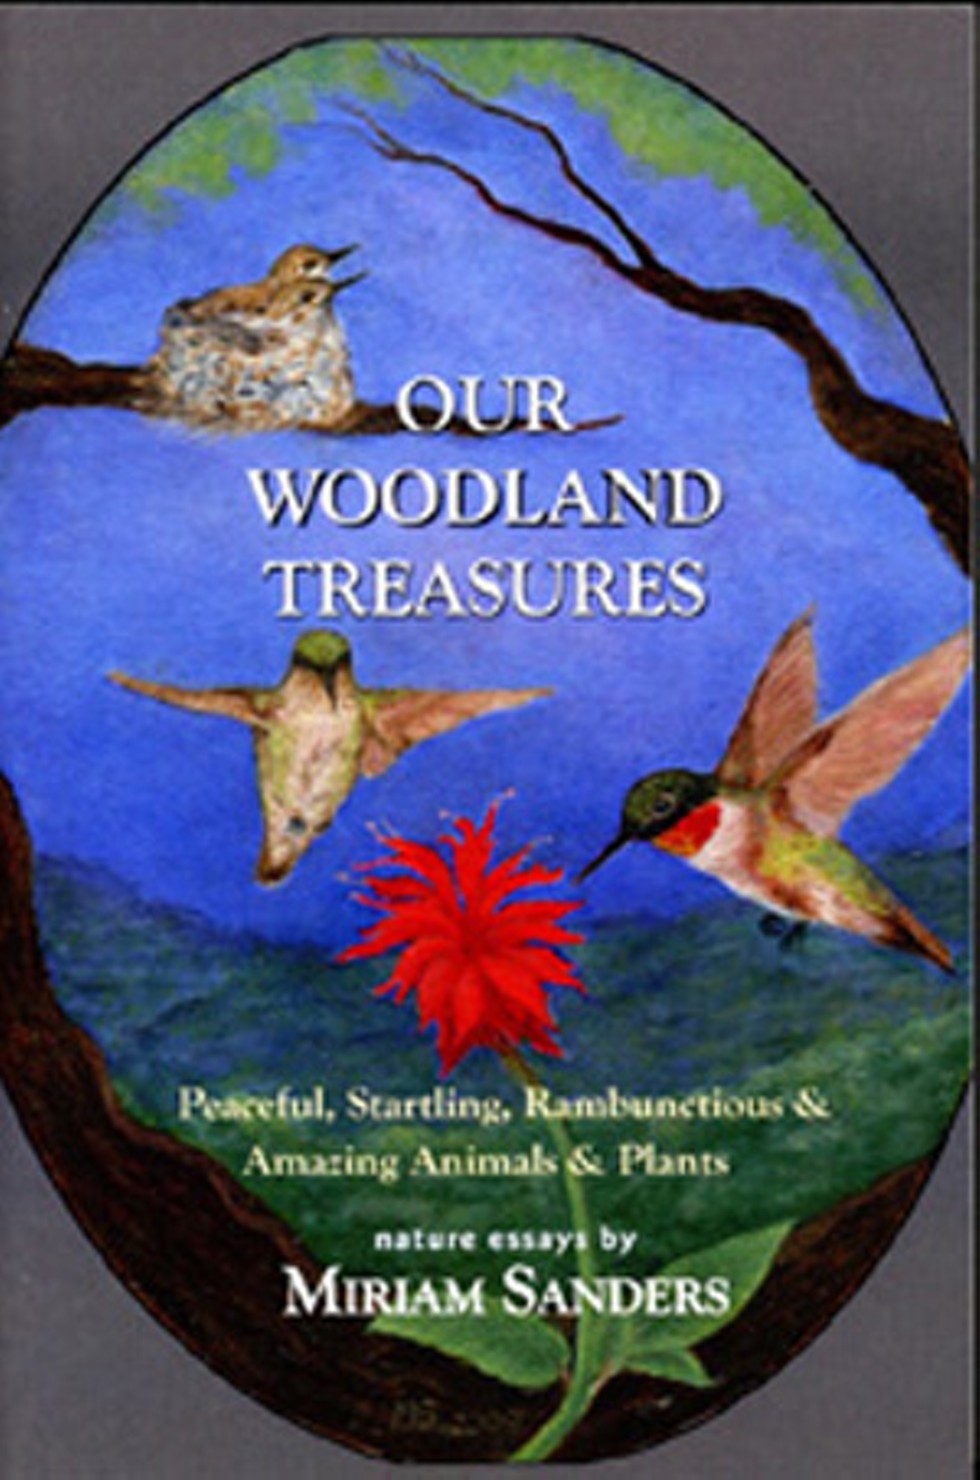 "Peaceful, Startling, Rambunctious and Amazing Animals & Plants"